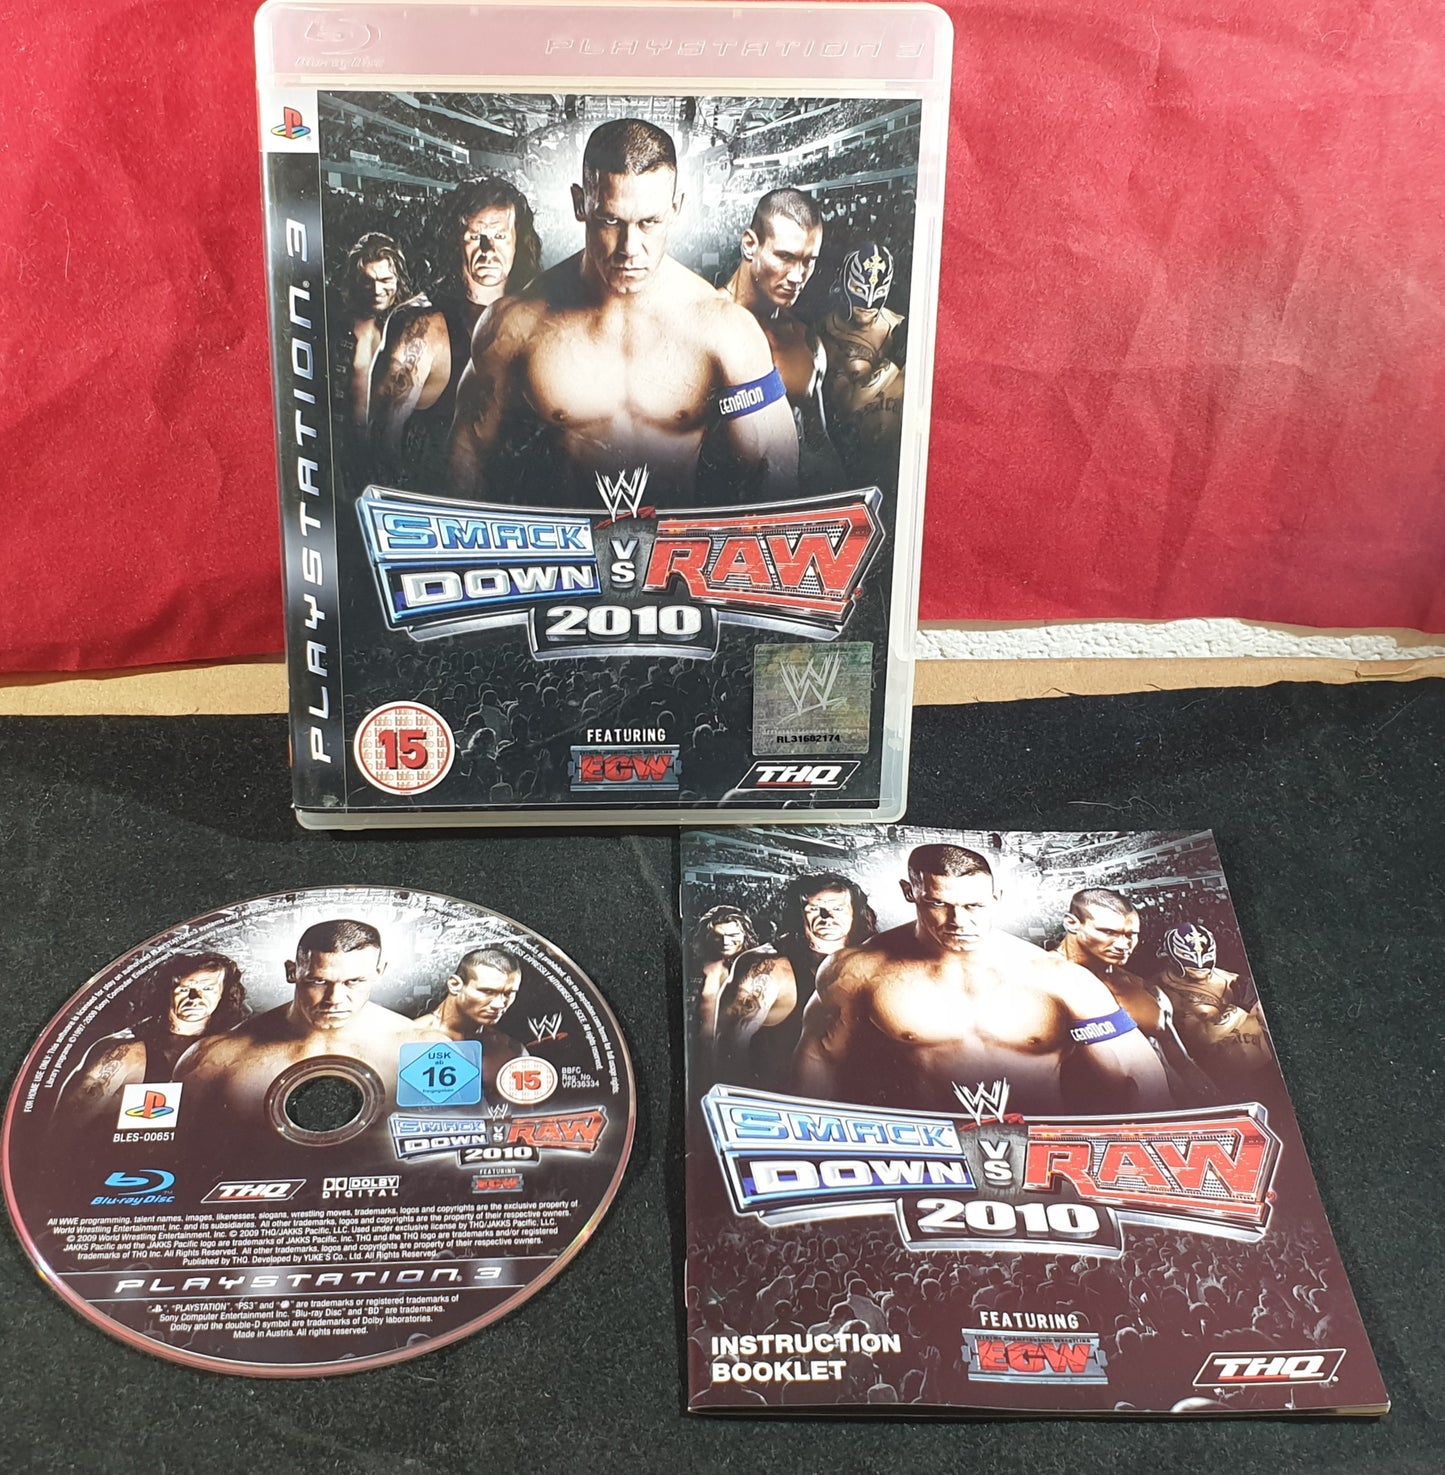 WWE Smackdown Vs Raw 2010 Sony Playstation 3 (PS3) Game